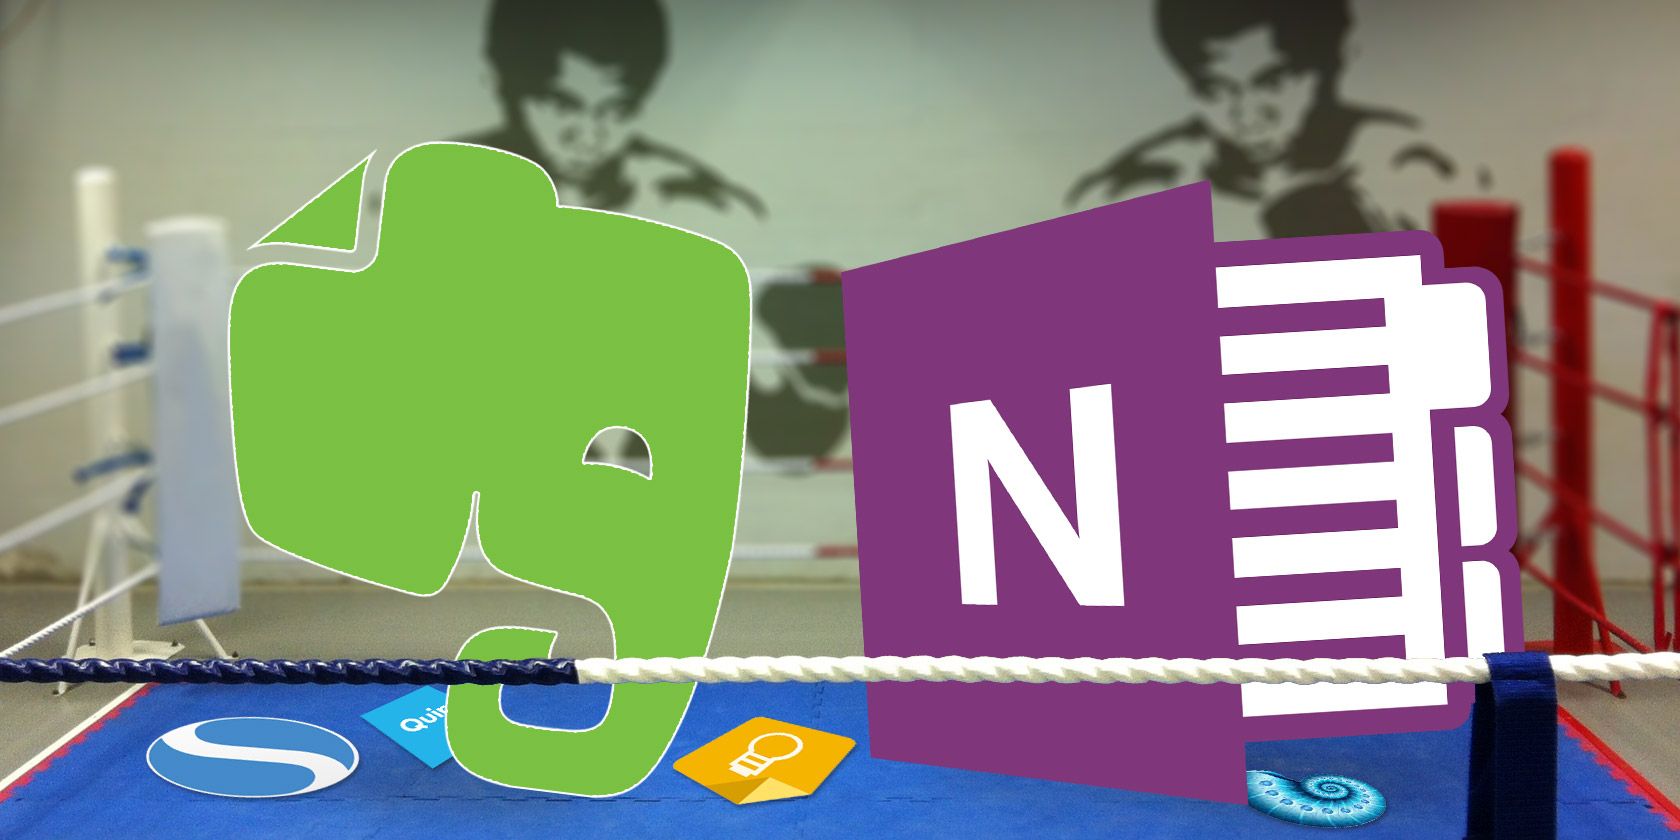 onenote vs evernote android